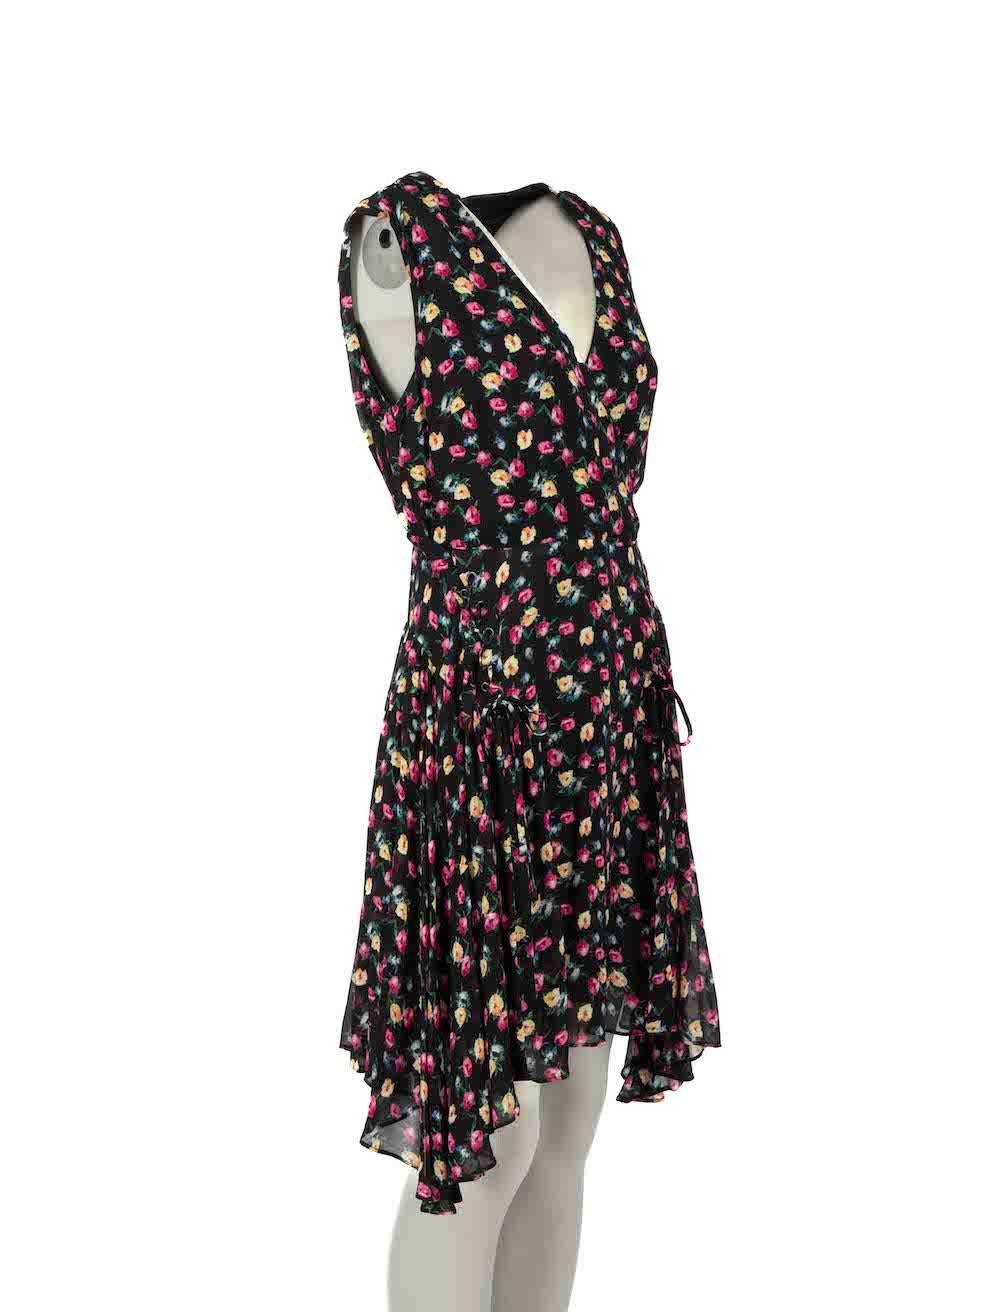 CONDITION is Good. Minor wear to dress is evident. Light wear to fabric composition with a number of pulls to the weave found at the hem on this used All Saints designer resale item.
 
Details
Black
Viscose
Mini dress
Floral print pattern
V